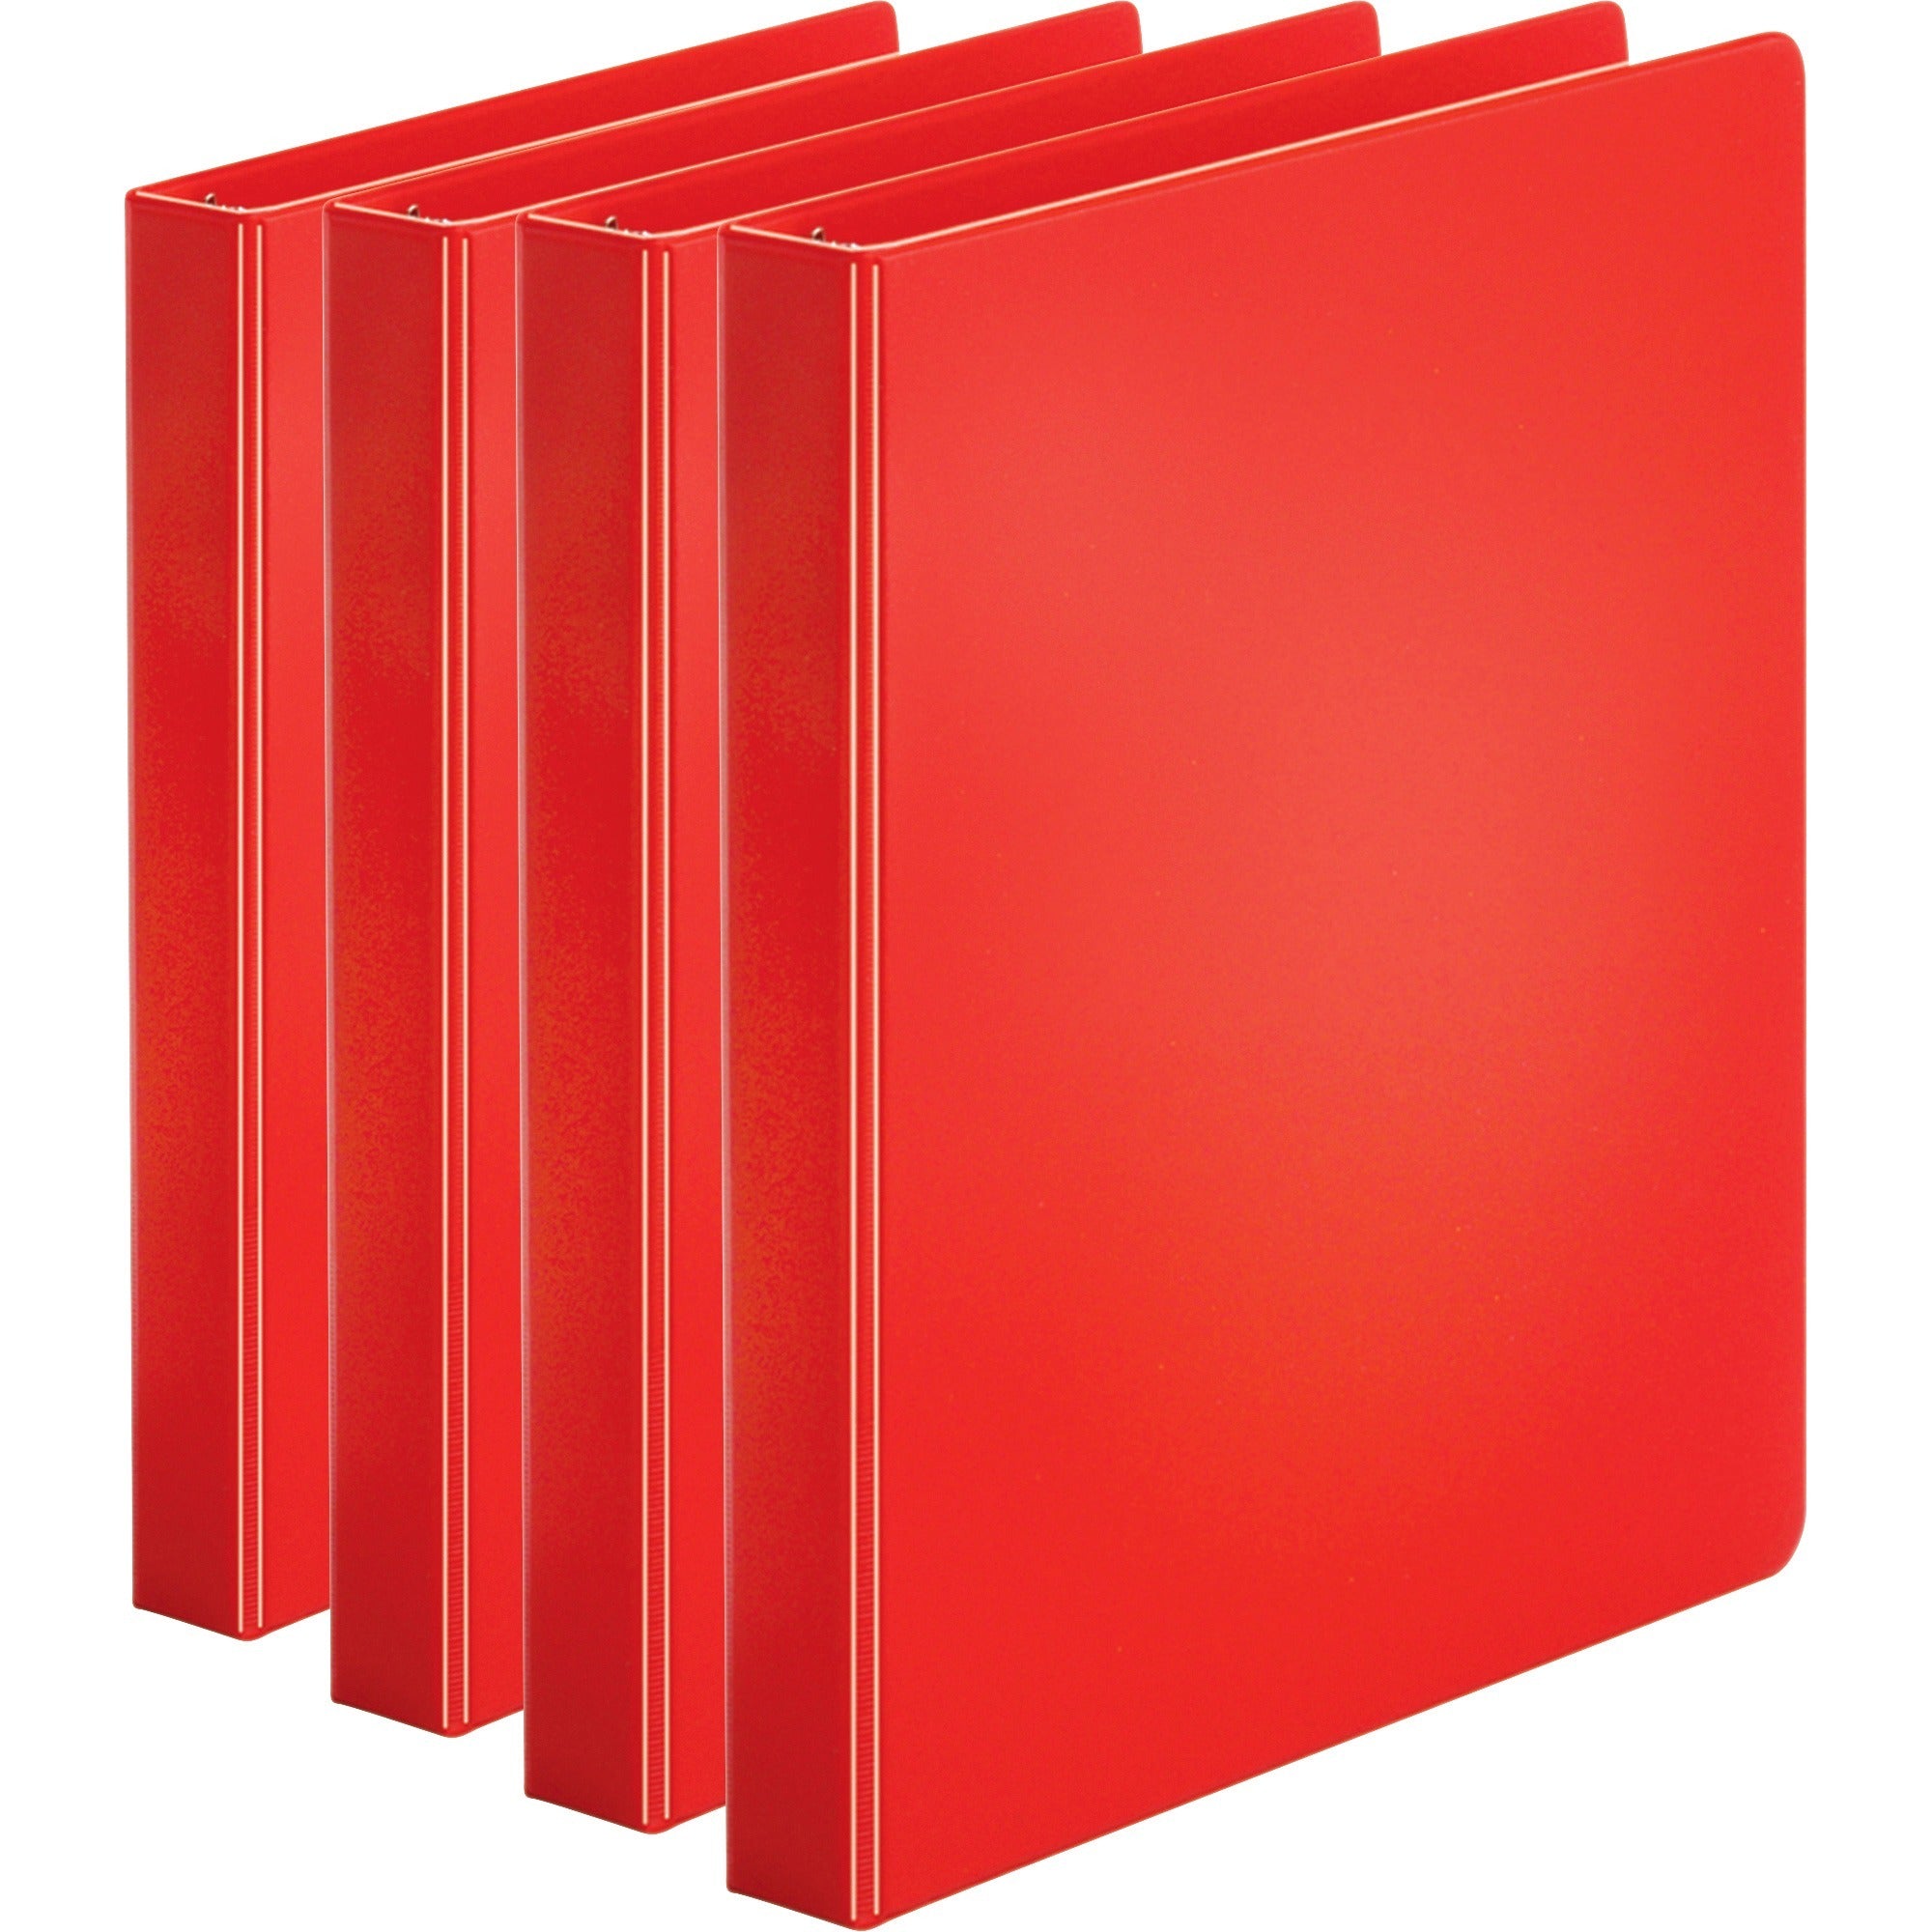 business-source-basic-round-ring-binders-1-binder-capacity-letter-8-1-2-x-11-sheet-size-225-sheet-capacity-3-x-round-ring-fasteners-internal-pockets-chipboard-polypropylene-red-exposed-rivet-sturdy-4-bundle_bsn28550bd - 1